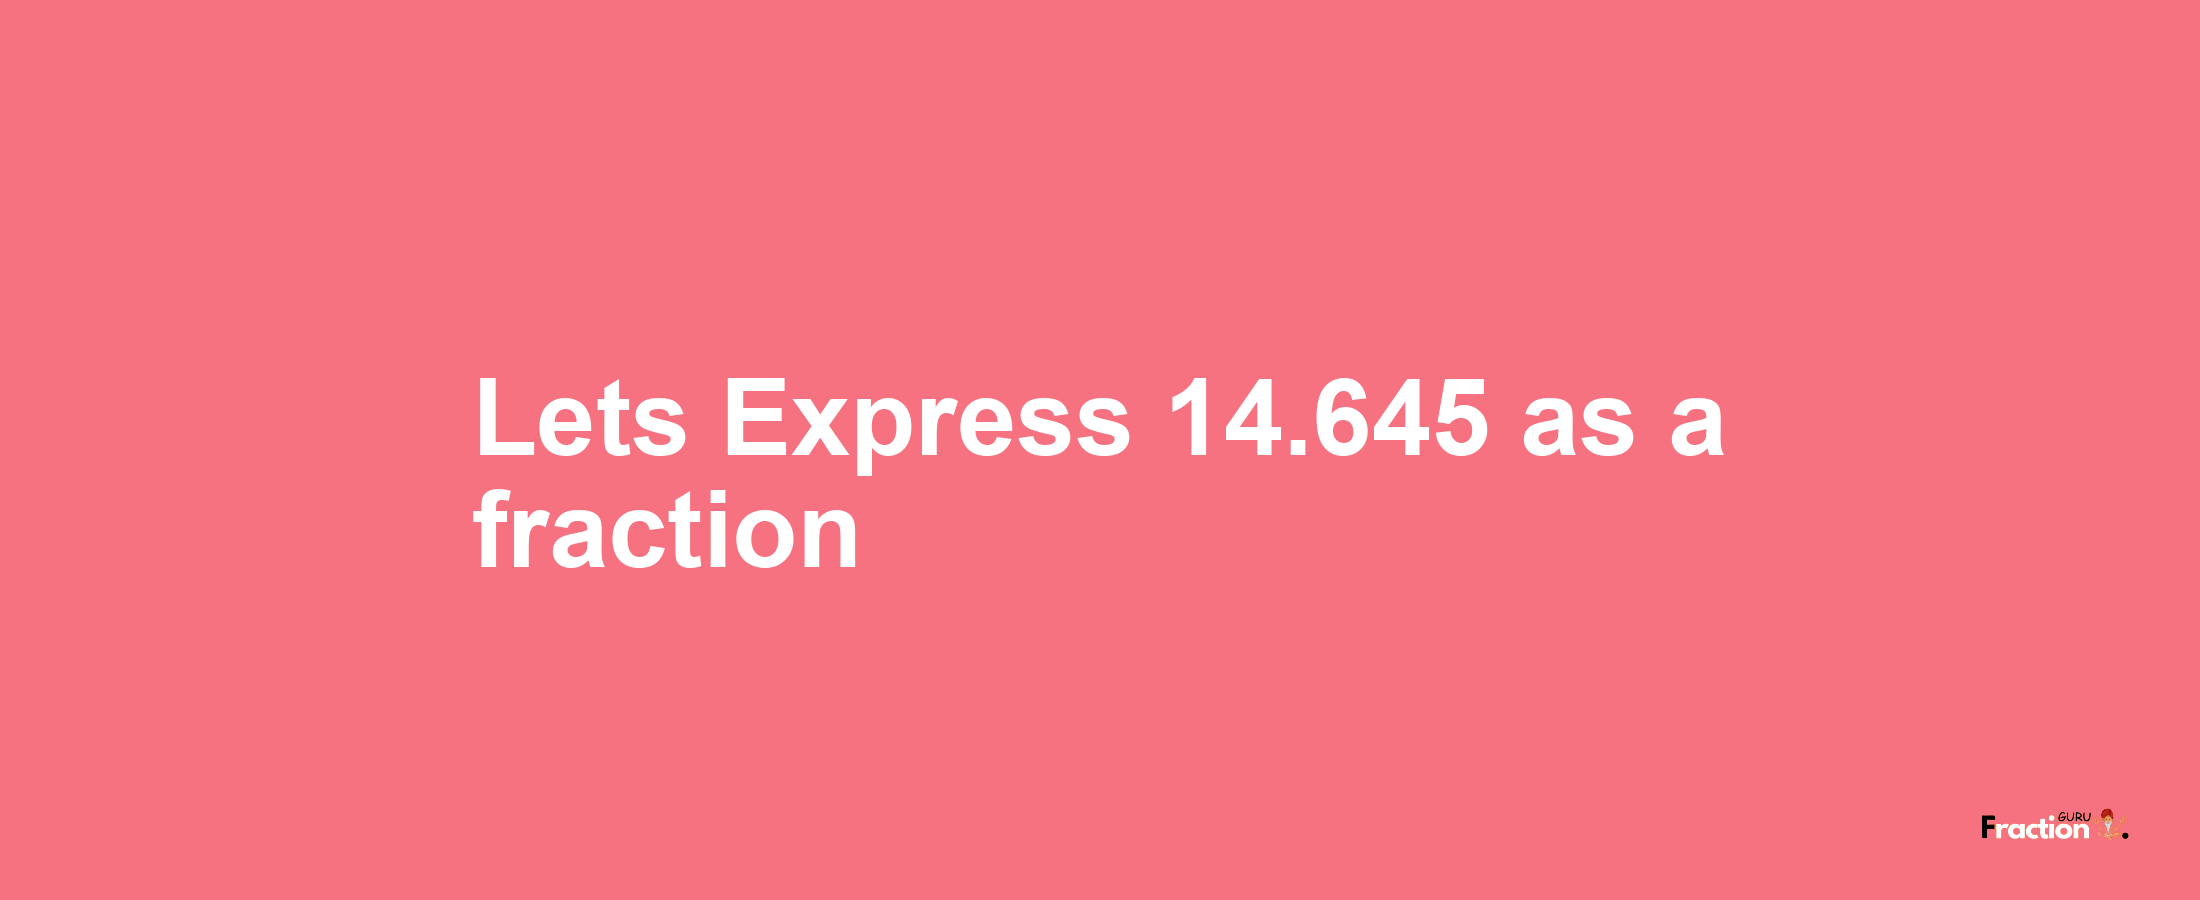 Lets Express 14.645 as afraction